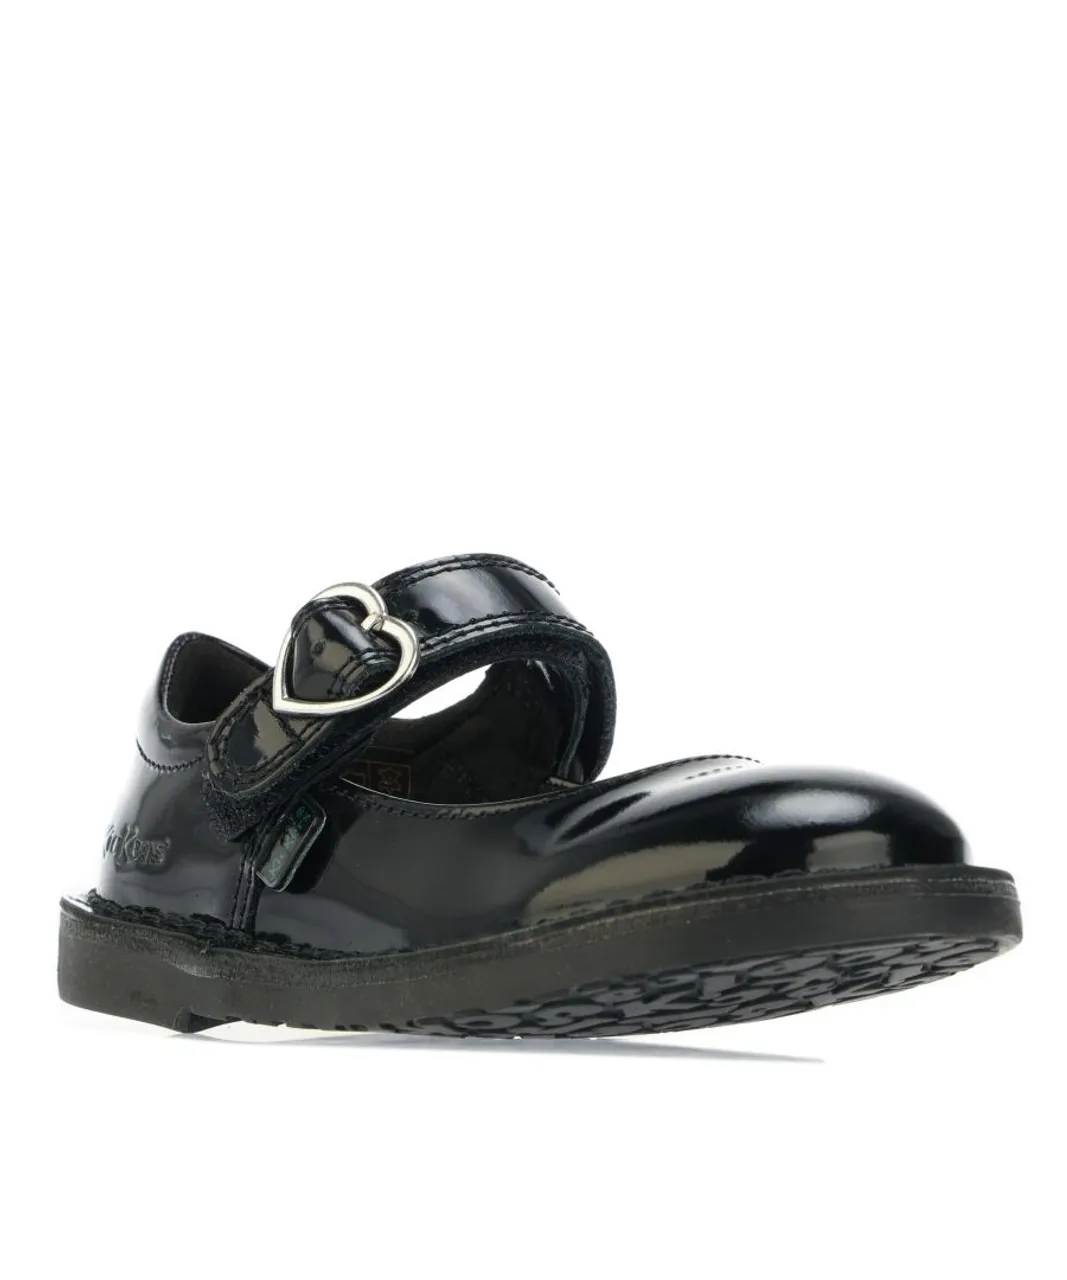 Kickers Girls Girl's Infant Adlar Heart Patent Shoe in Black Leather (archived)